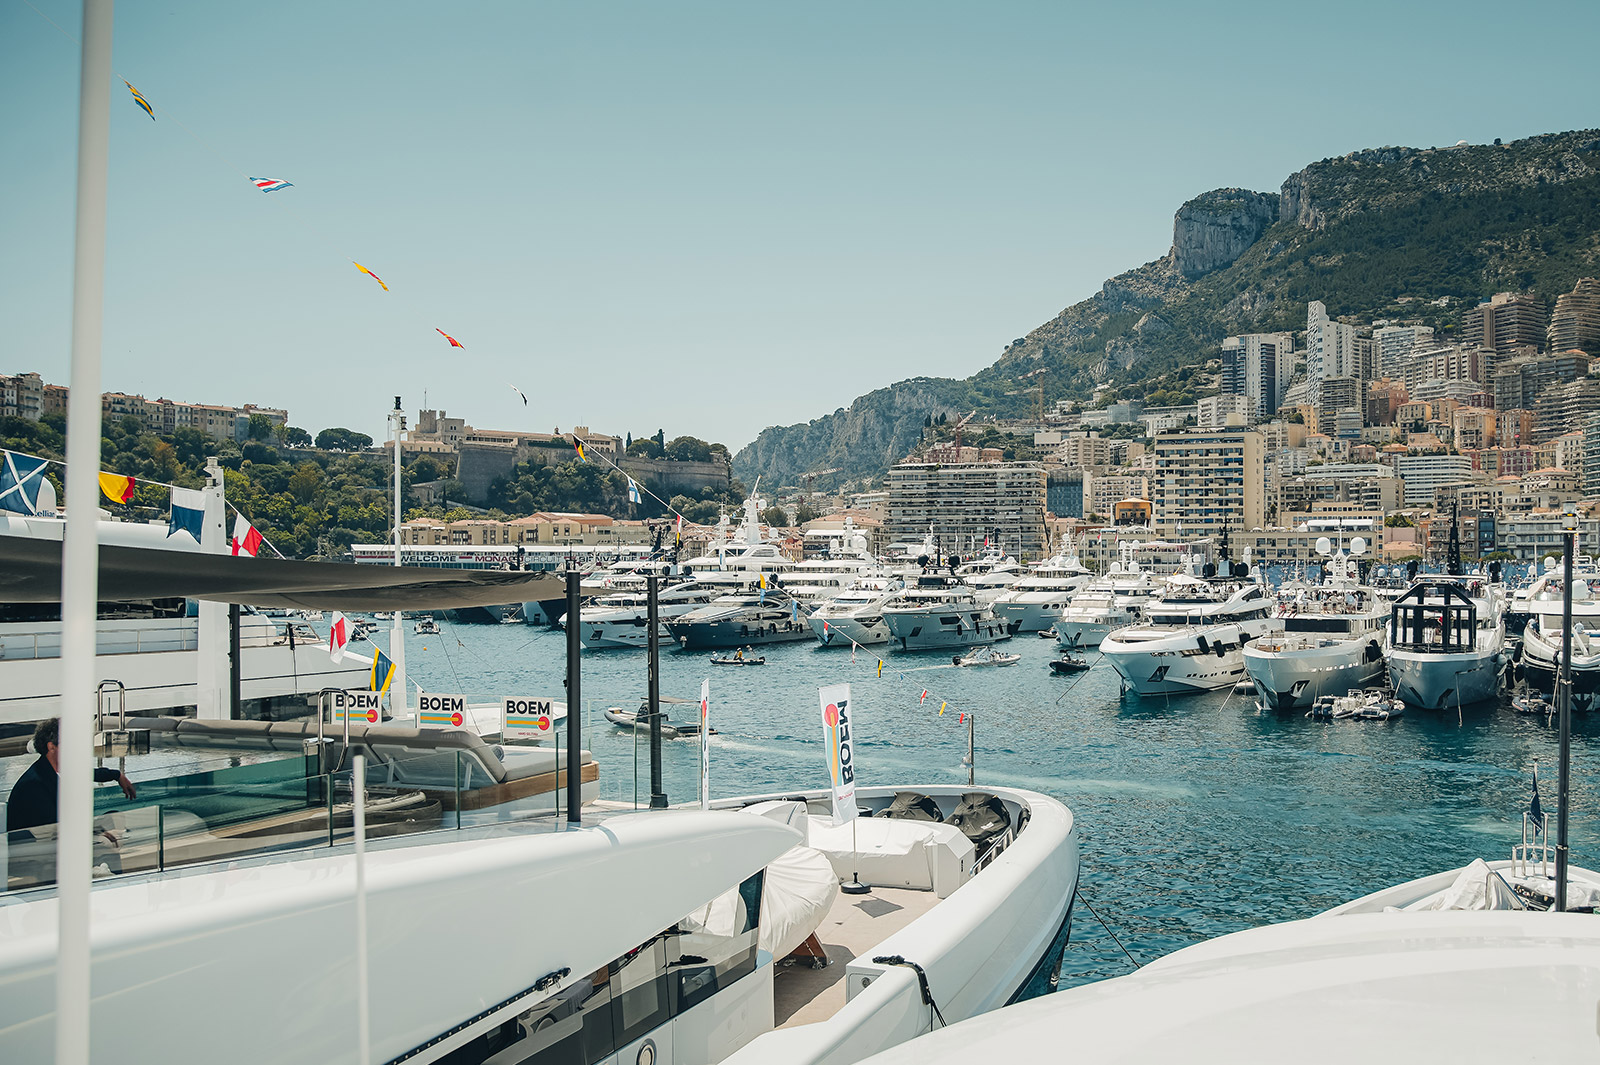 Port Hercule is packed with superyachts on a sunny day during the Monaco Grand Prix